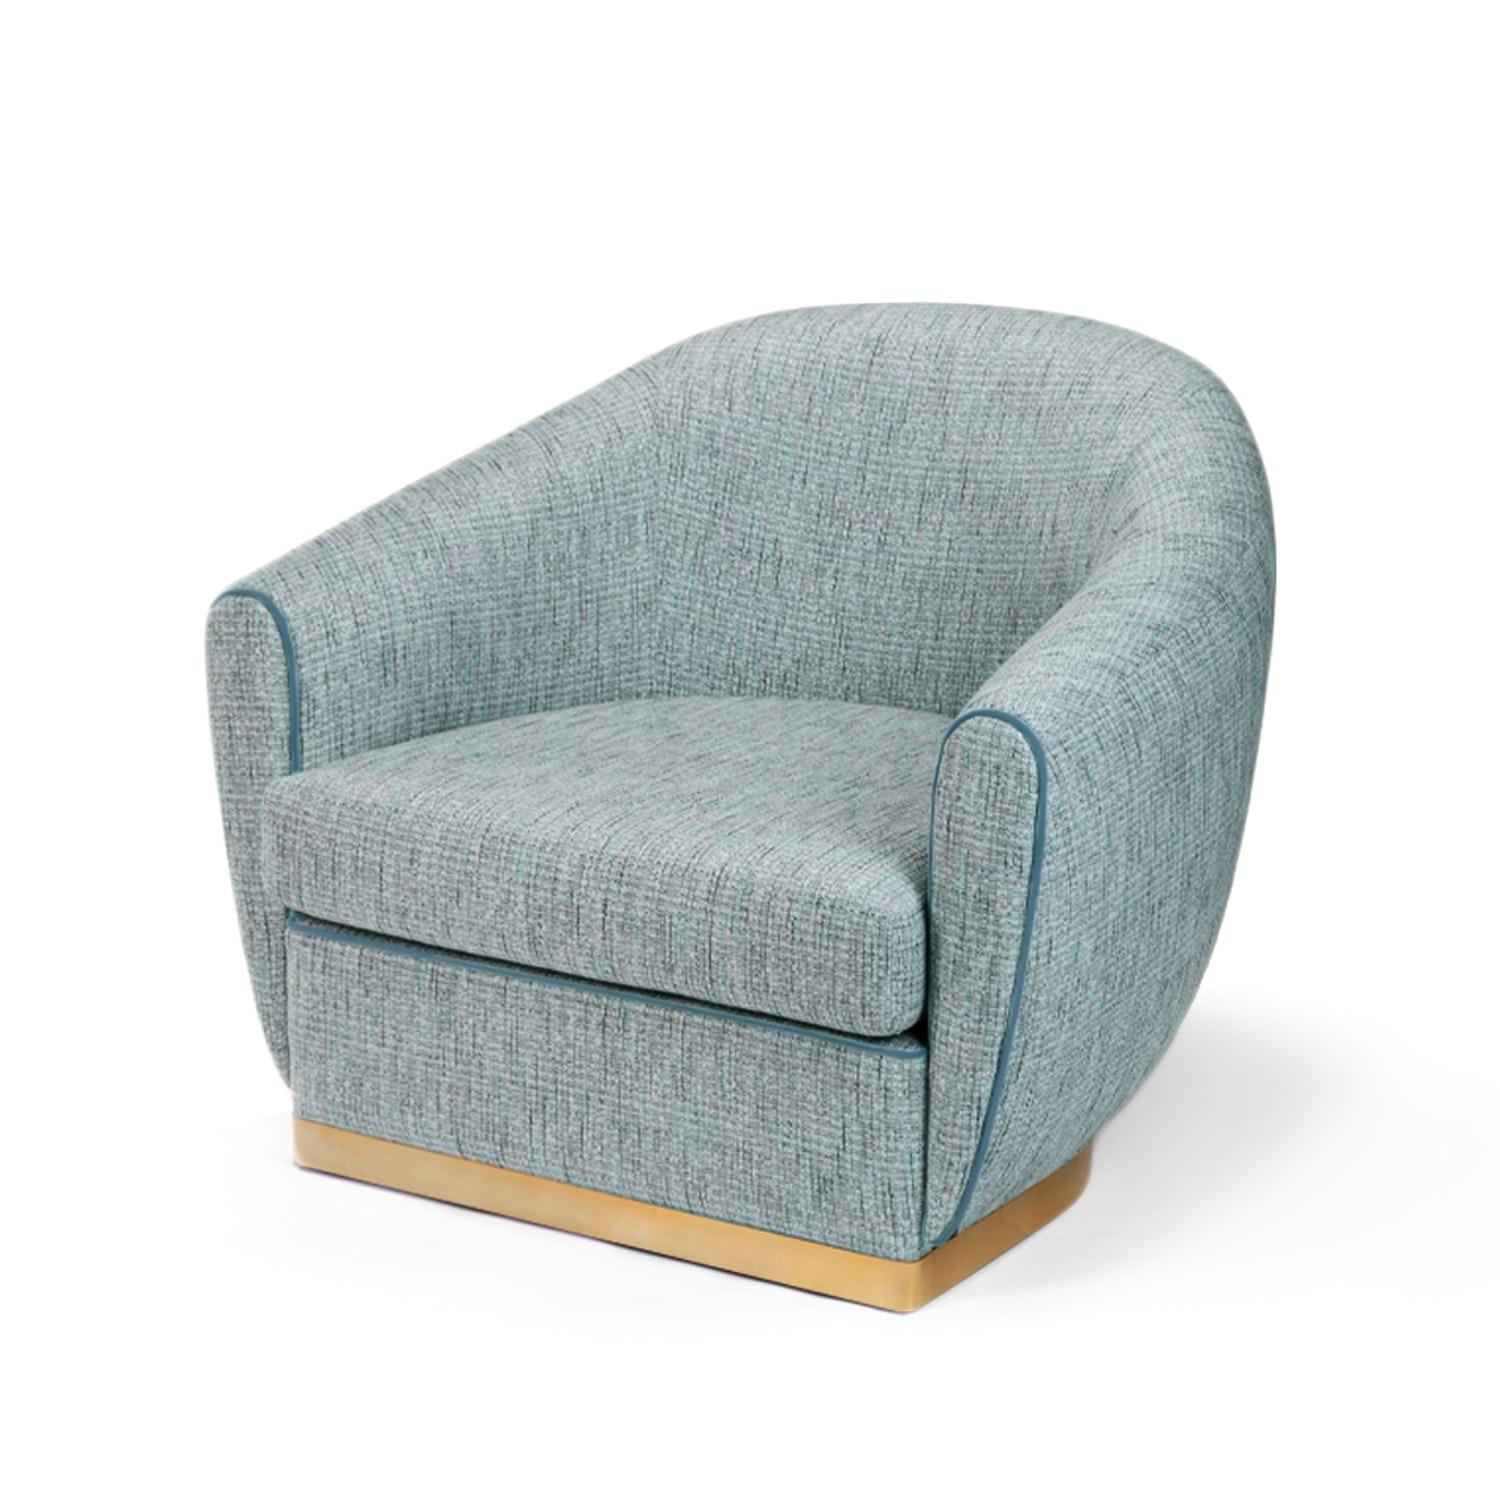 Stylish and elegant, Grace armchair is extremely comfortable in its perfect finishing’s. With its smooth edges, Grace has definitely a familiar retro feeling. A perfect combination of highly comfortable and perfectly tailored upholstery with the